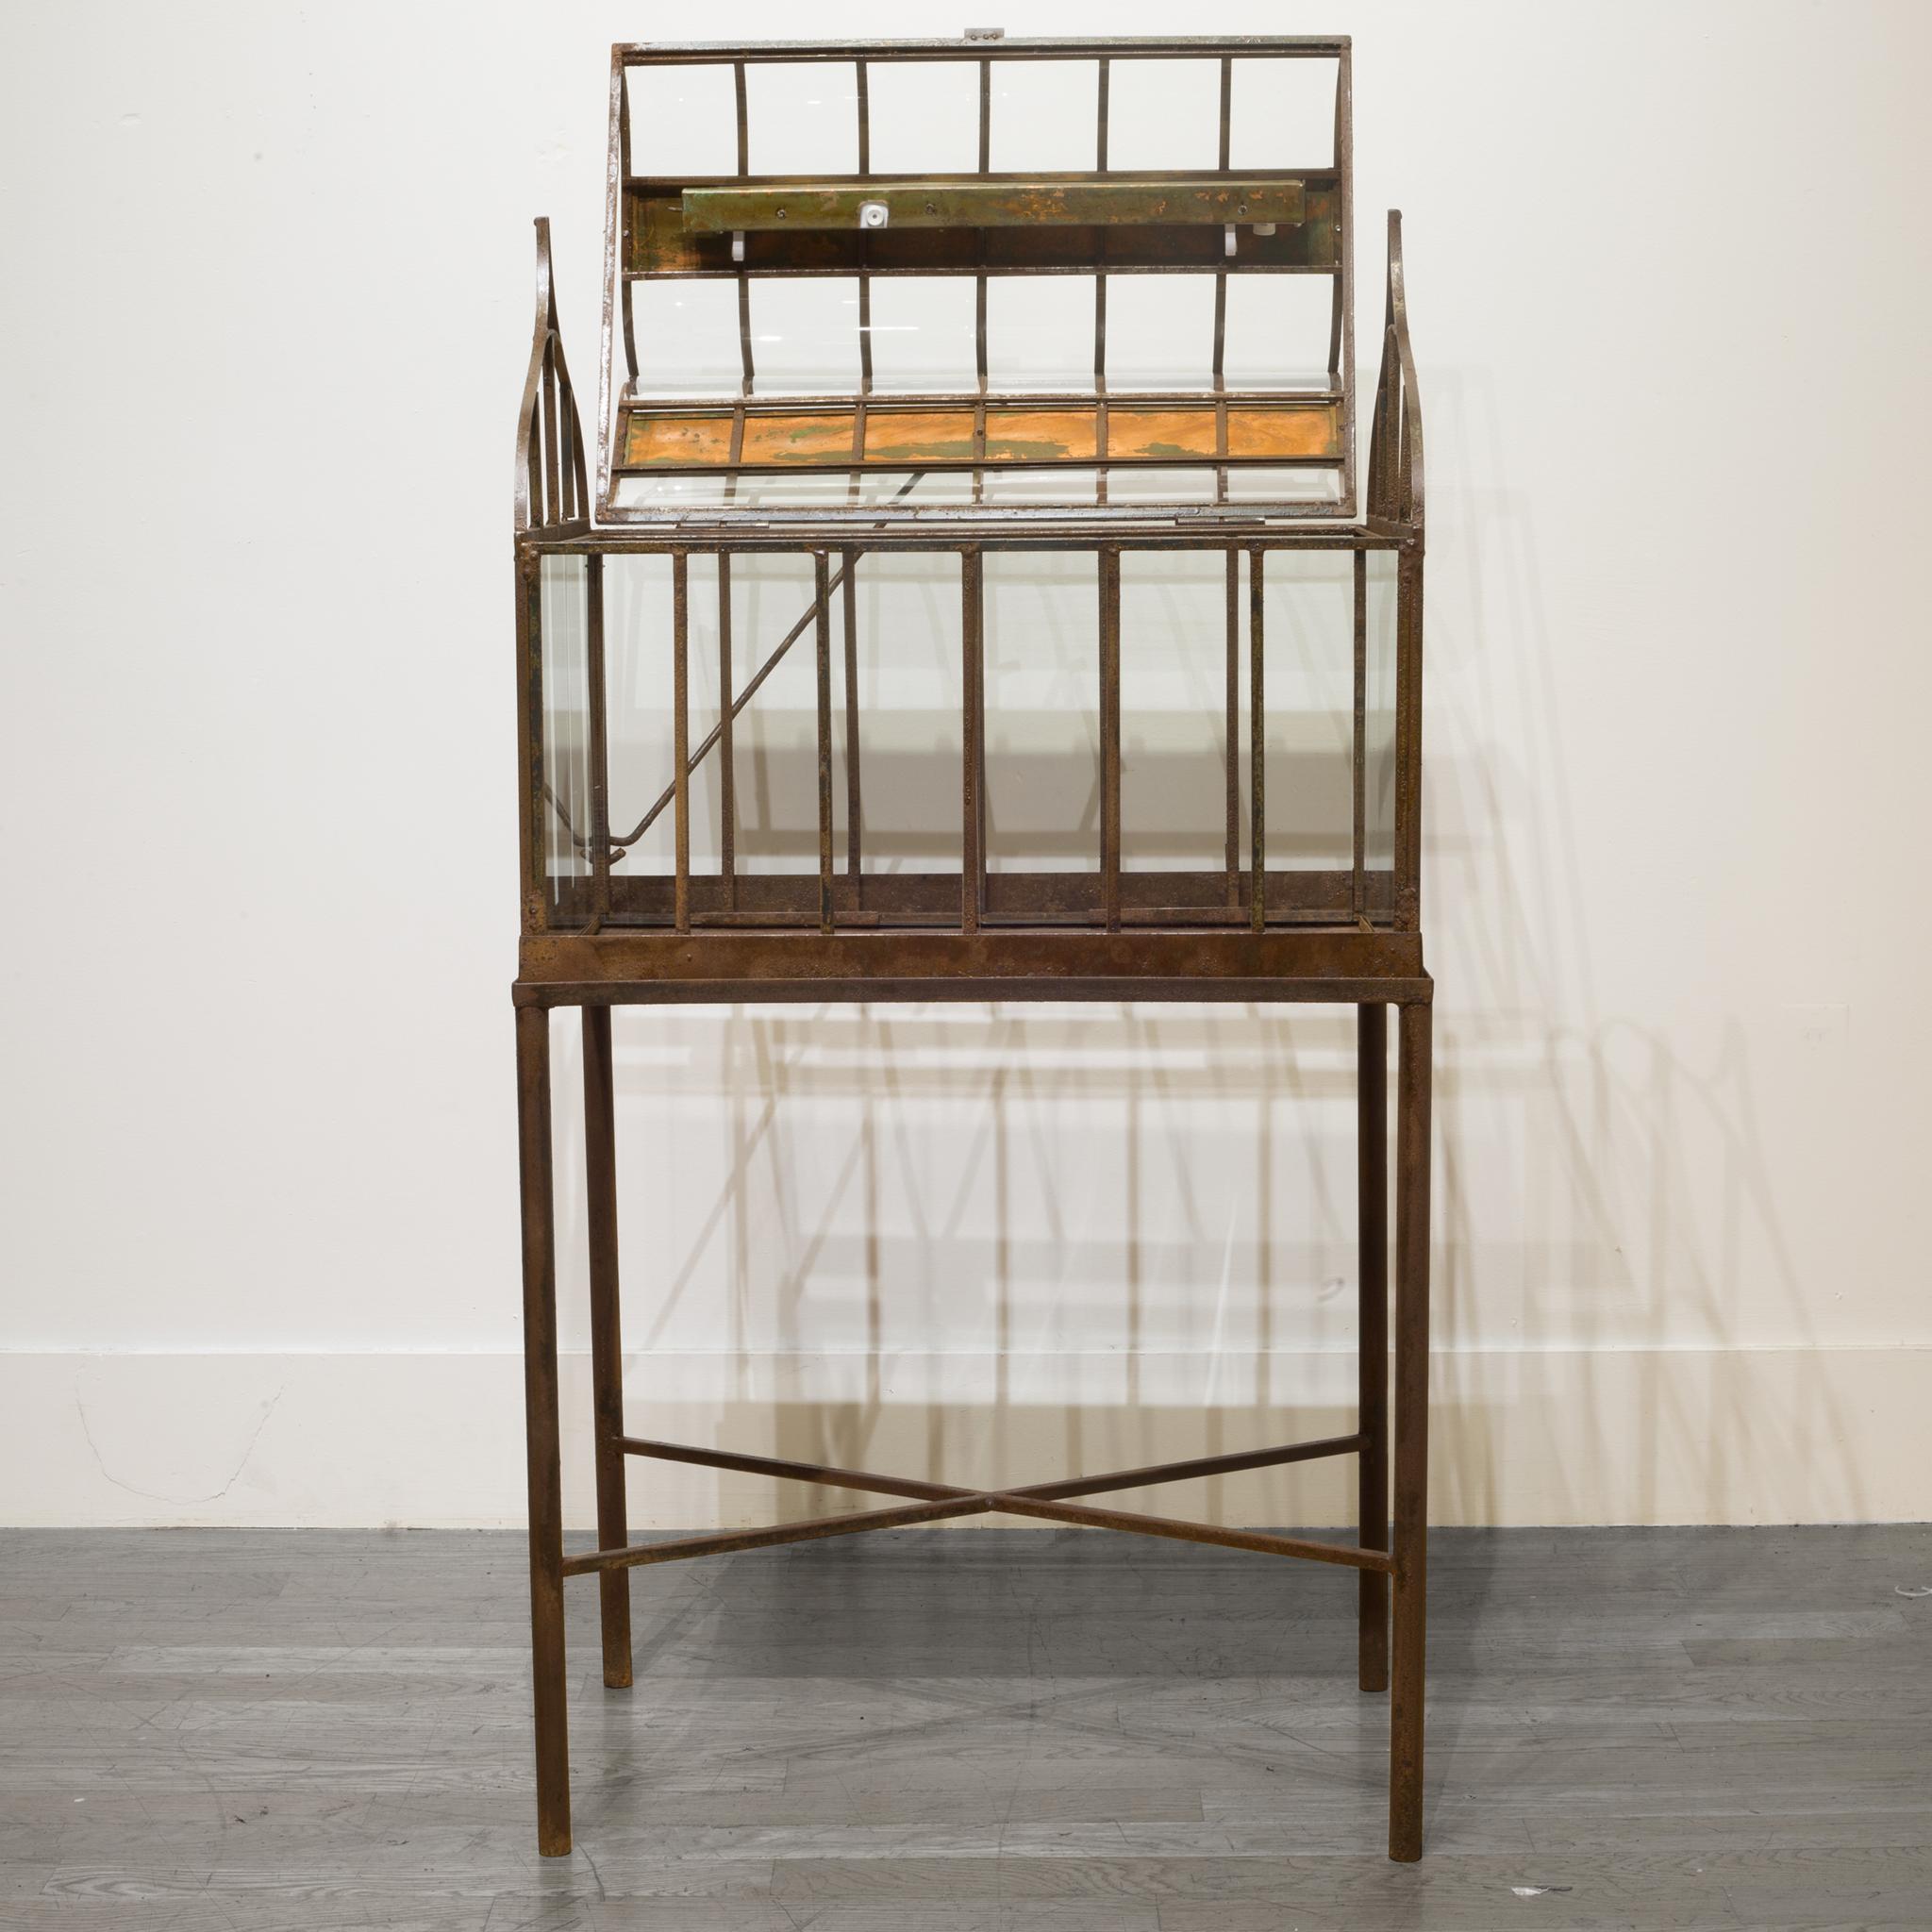 Industrial Turn of the Century Antique Wrought Iron Wardian Case on Stand, circa 1900